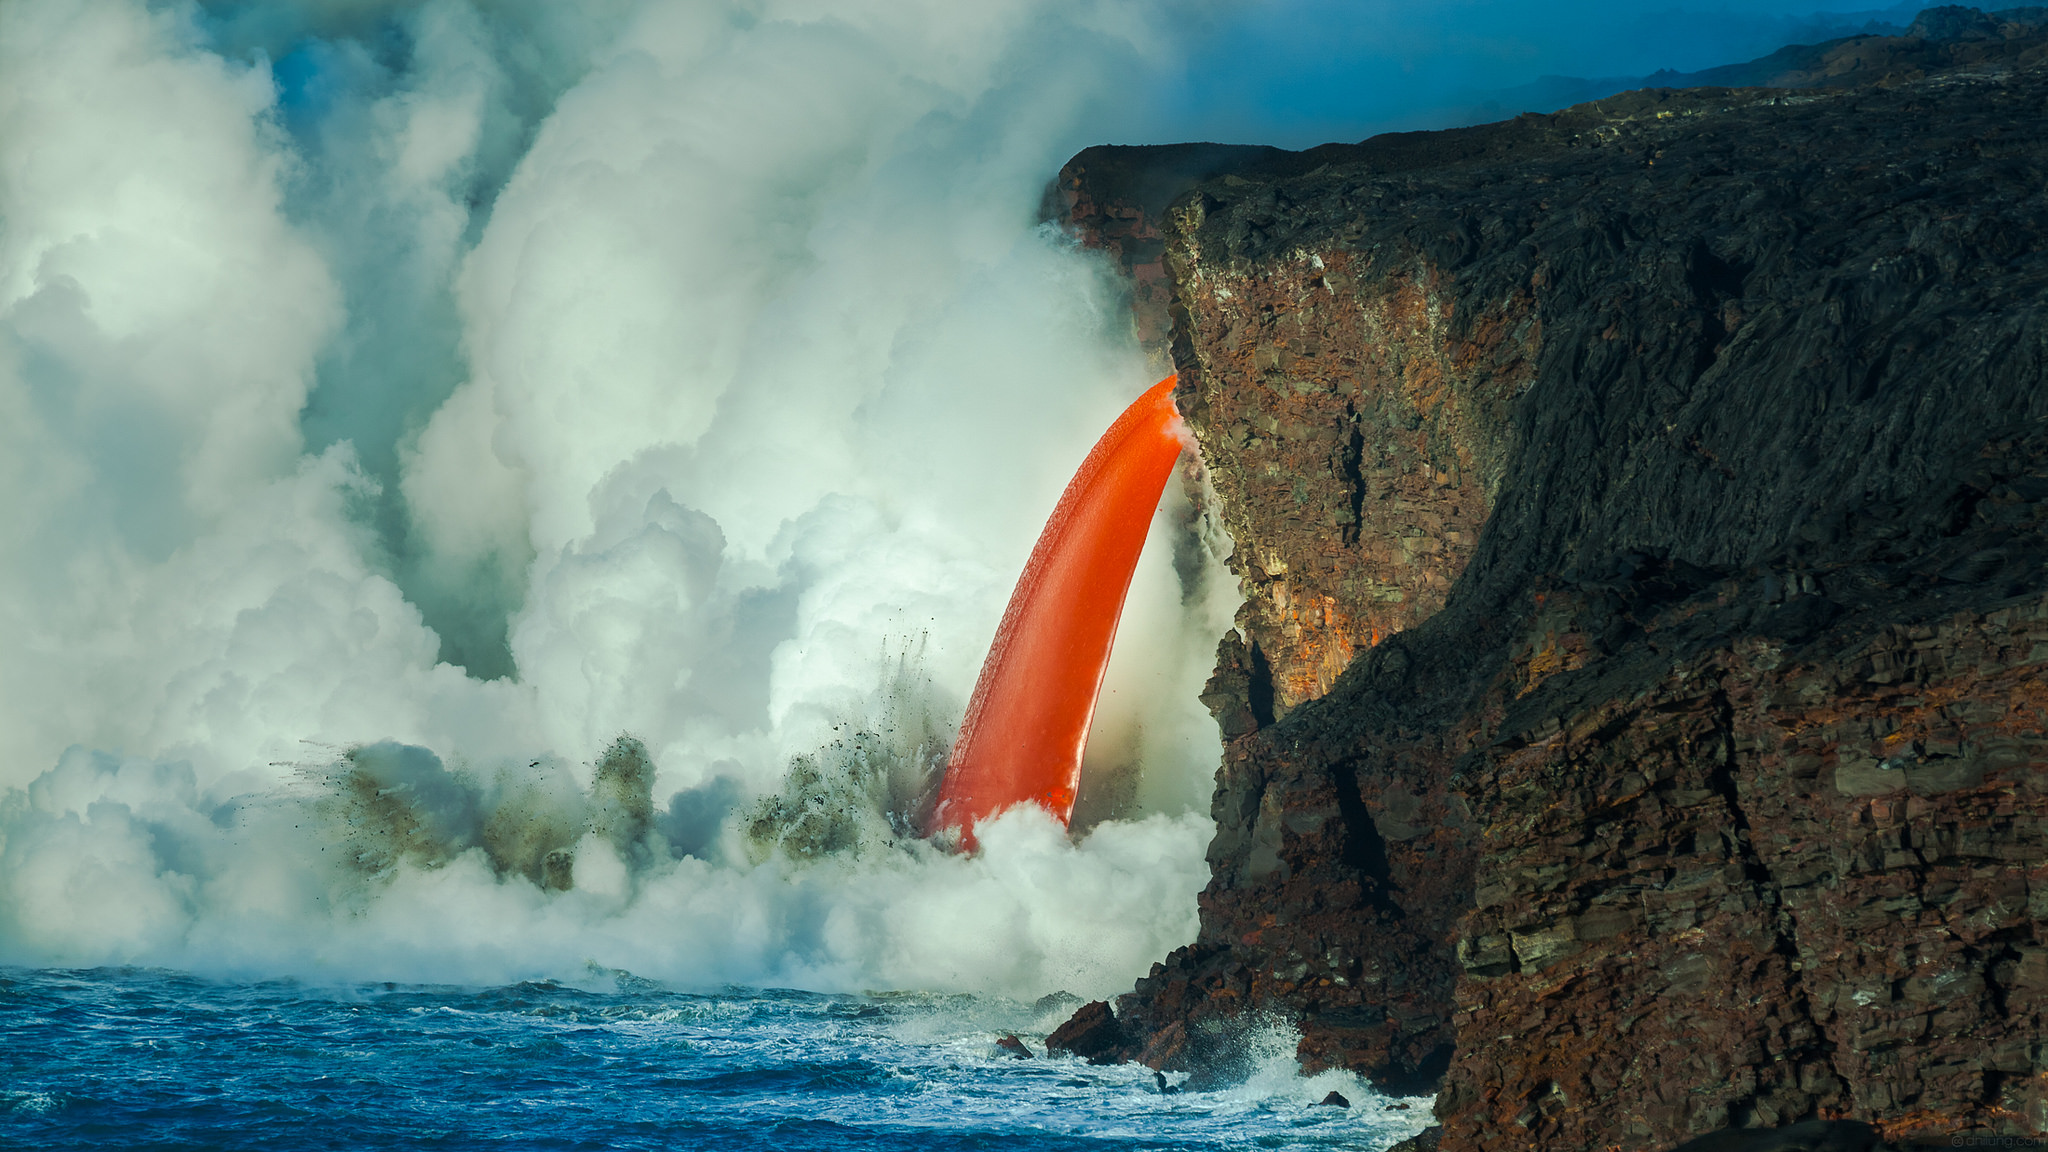 Lava Waterfall, Kilauea Volcano, Hawaii - Lava from the Kilauea volcano flowing into the Pacific Ocean on Jan 30th, 2017 (61G ocean entry). It is considered an unusual phenomenon by geologists. The 'waterfall' was formed after a portion of the Kamokuna lava delta collapsed